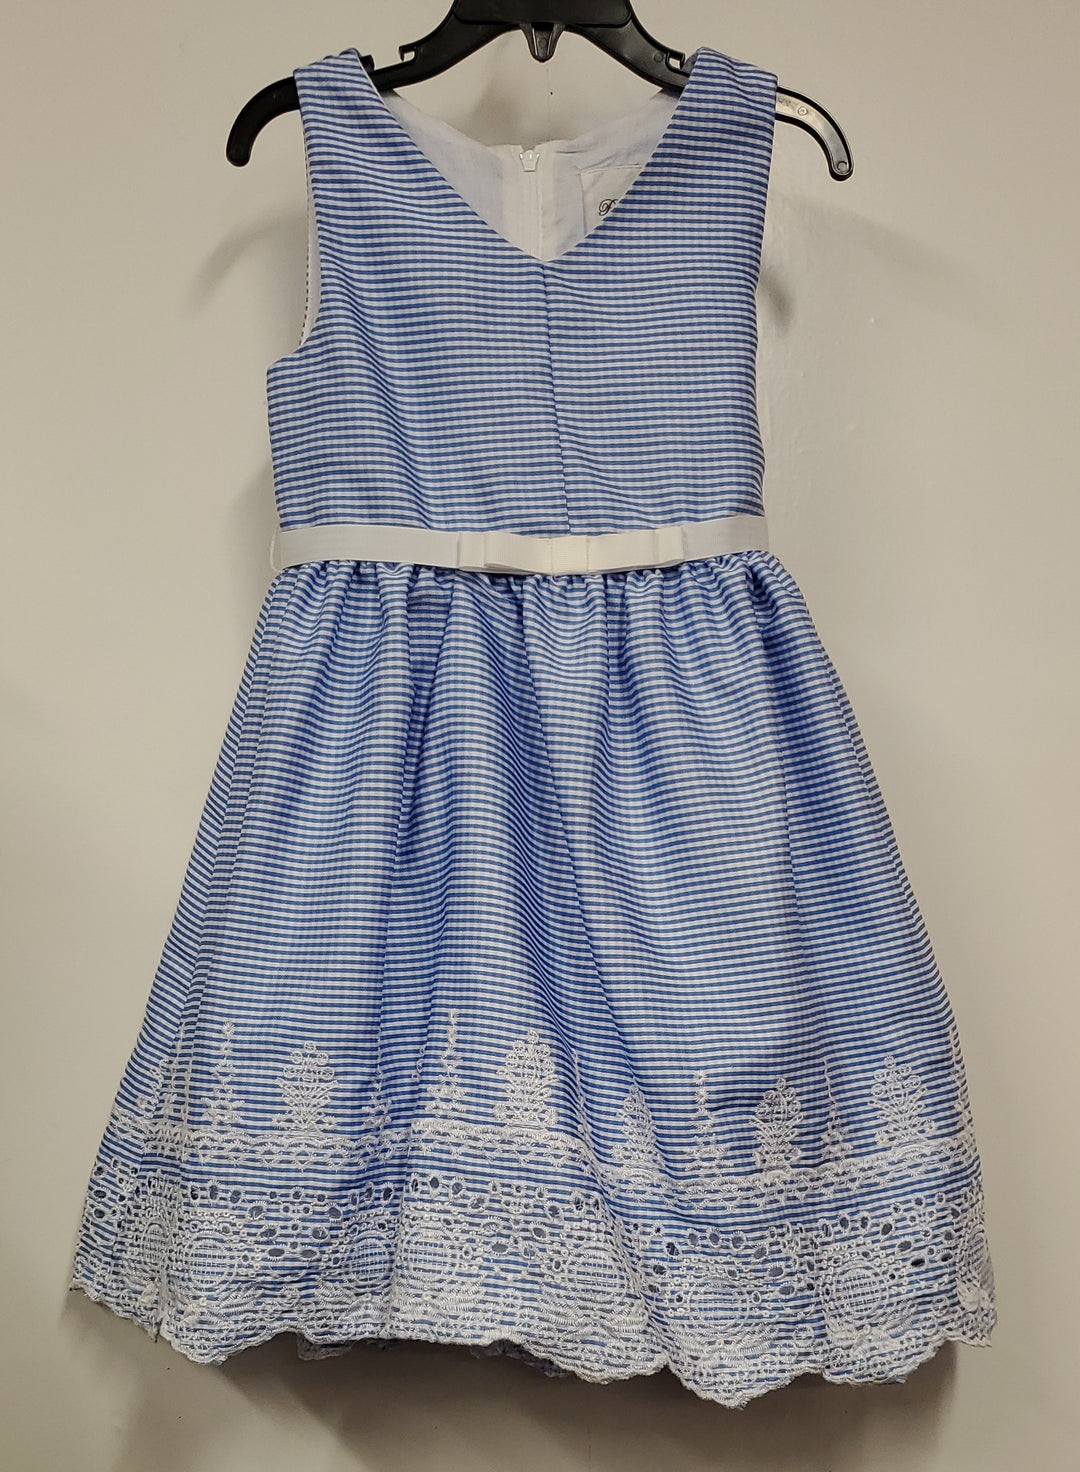 Toddler Blue/White Striped Dress with Embroidery Bottom